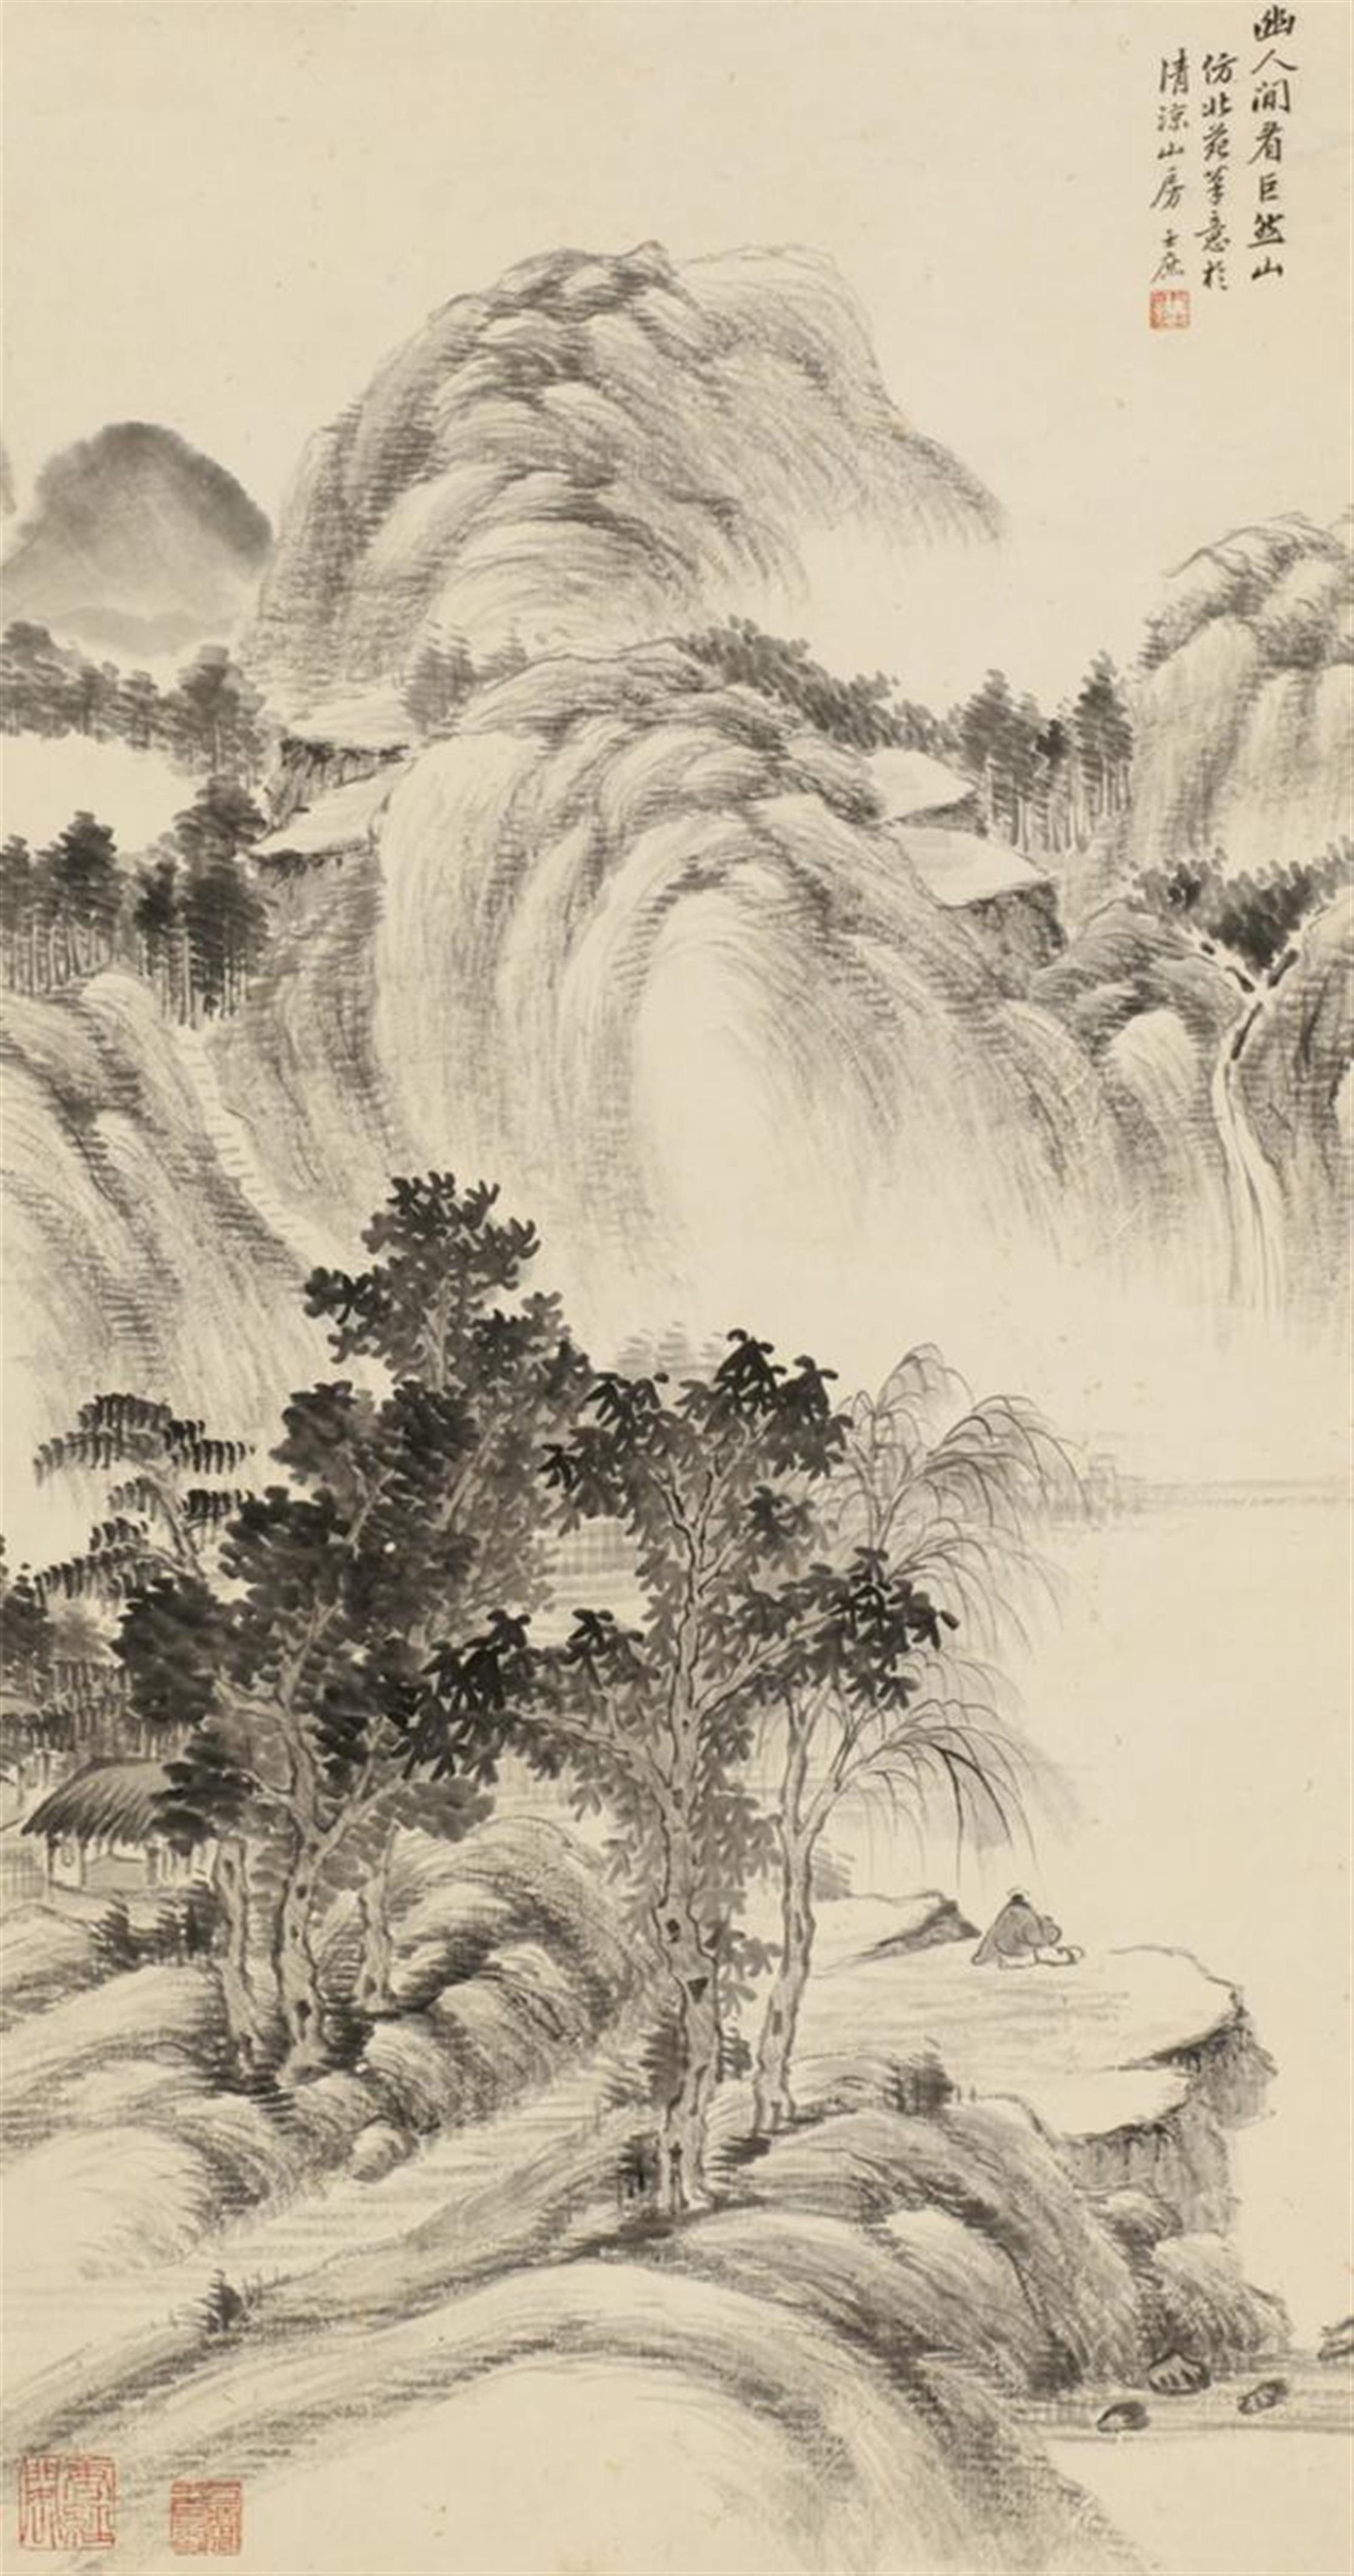 Fang Shishu, in the manner of. Qing dynasty - Landscape after Dong Beiyuan. Hanging scroll. Ink on paper. Inscibed Shishu and sealed Fang Shishu yin and two more seals. Qing dynasty. - image-1